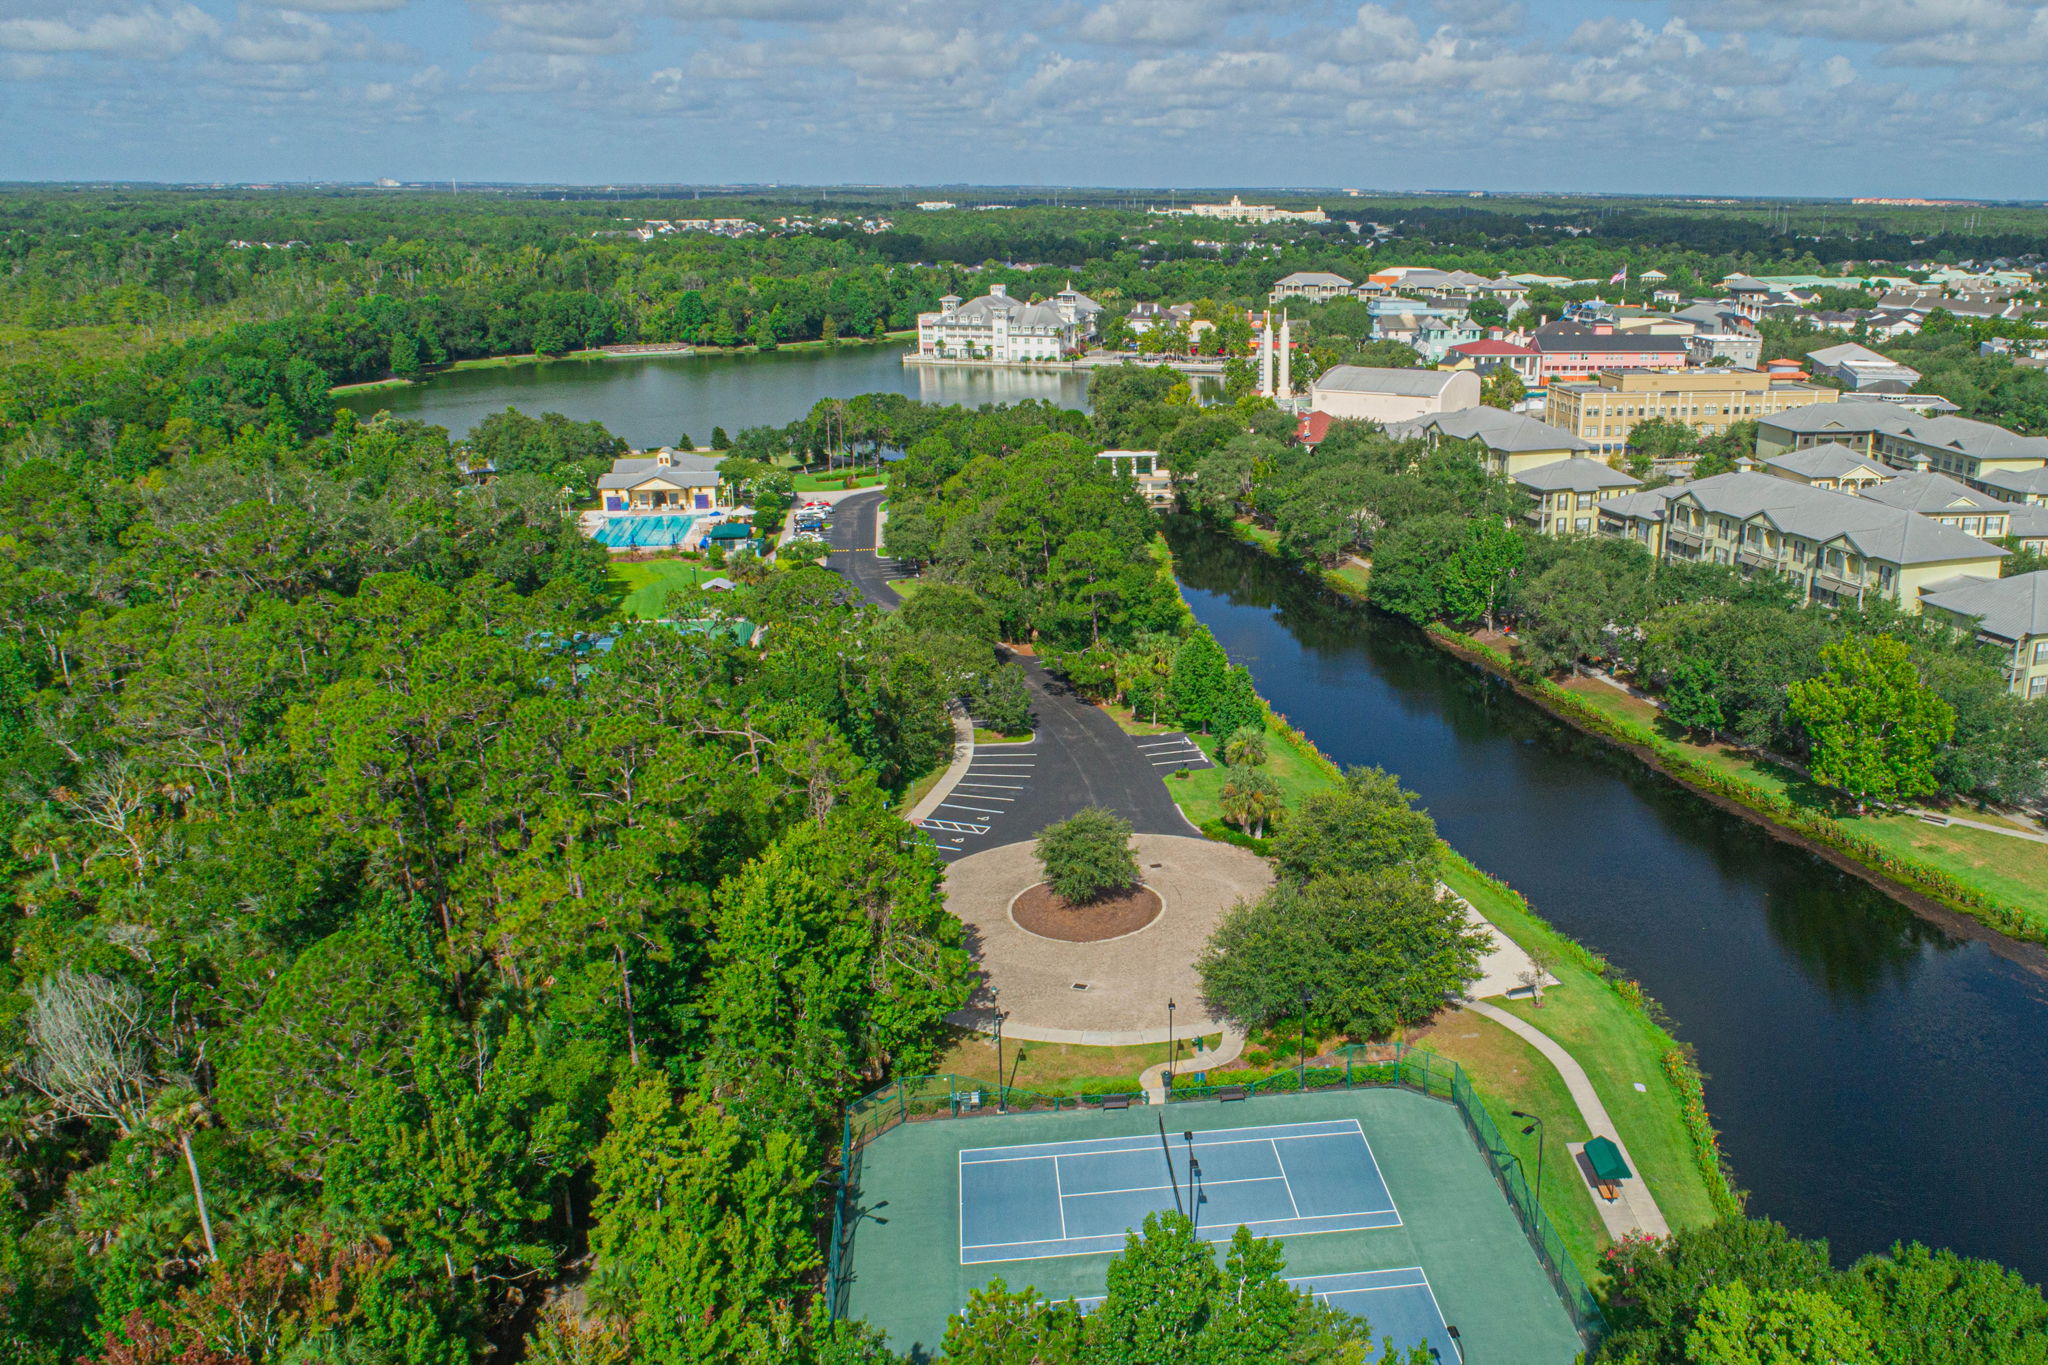 Aerial View of Tennis Courts, Canal, and Town